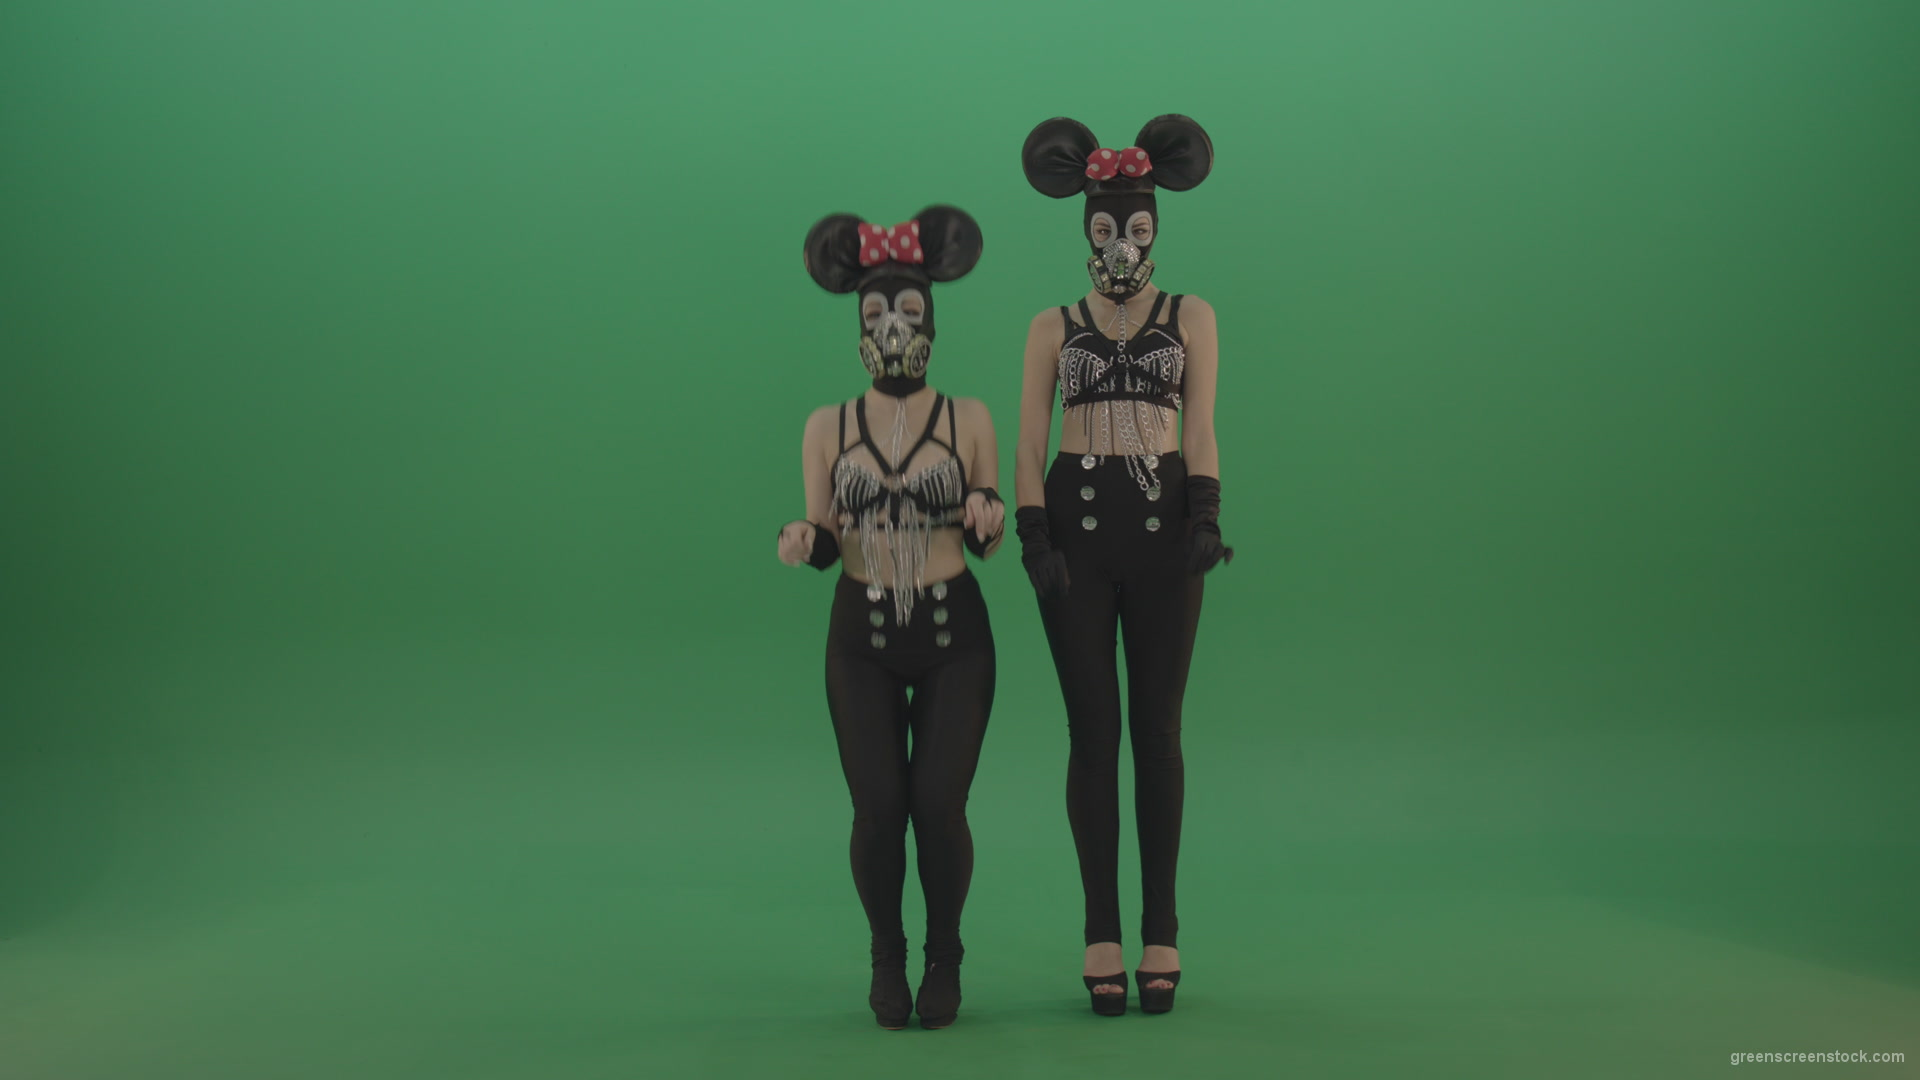 Two-girls-dressed-in-Mickey-Mouse-sit-squarelyon-green-screen_005 Green Screen Stock